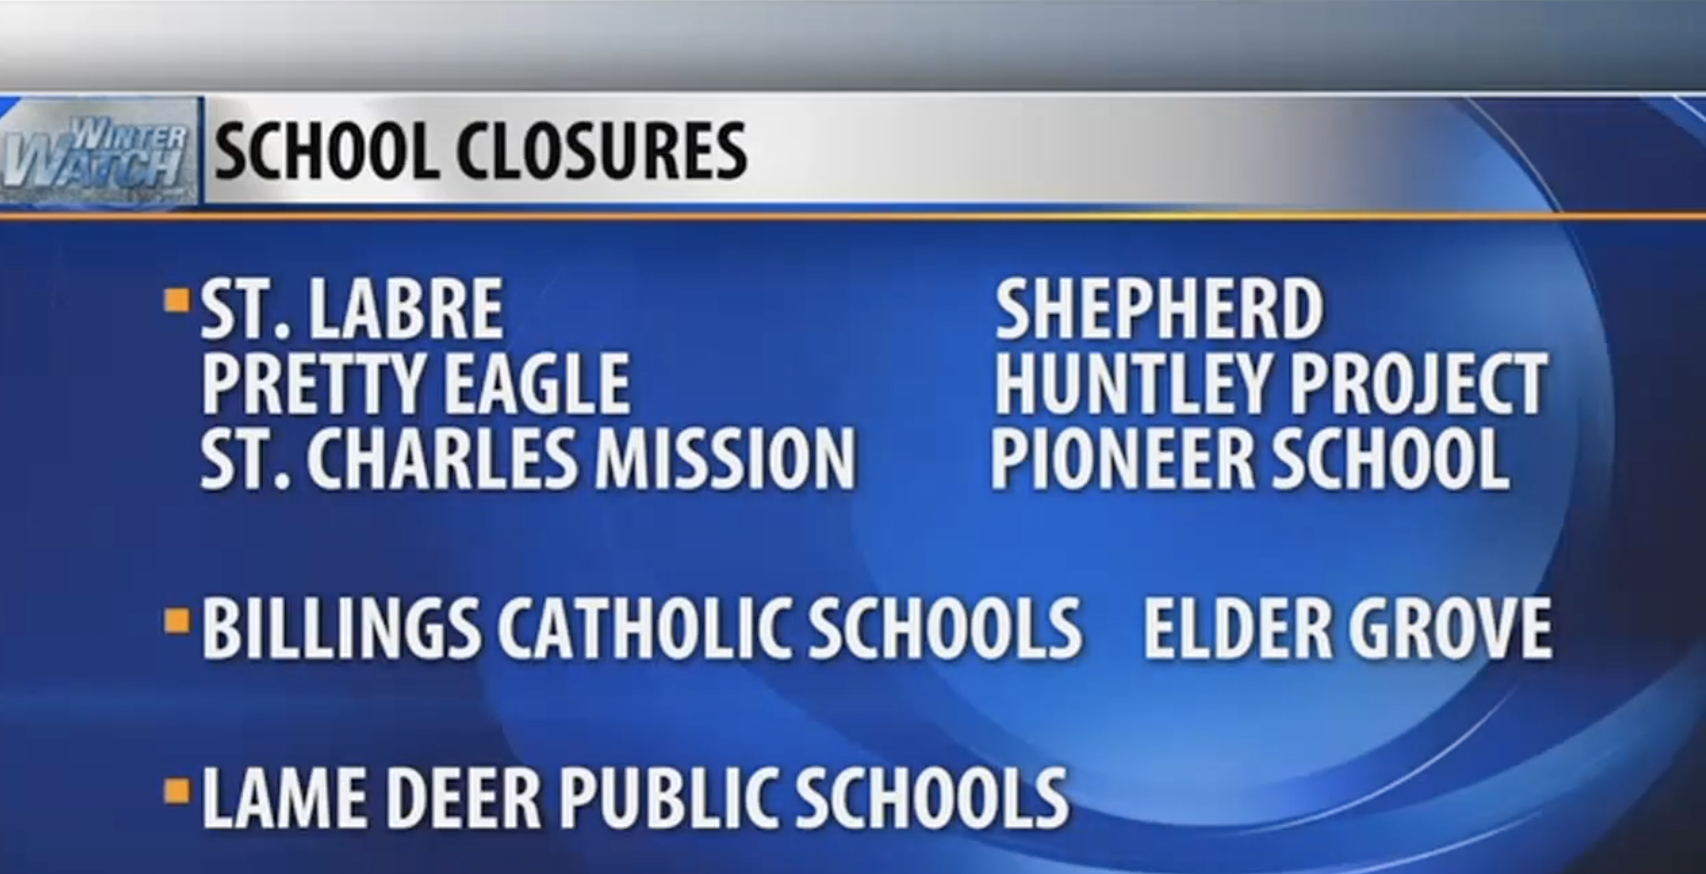 List of school closures due to weather, including St. Labre, Billings Catholic, and others